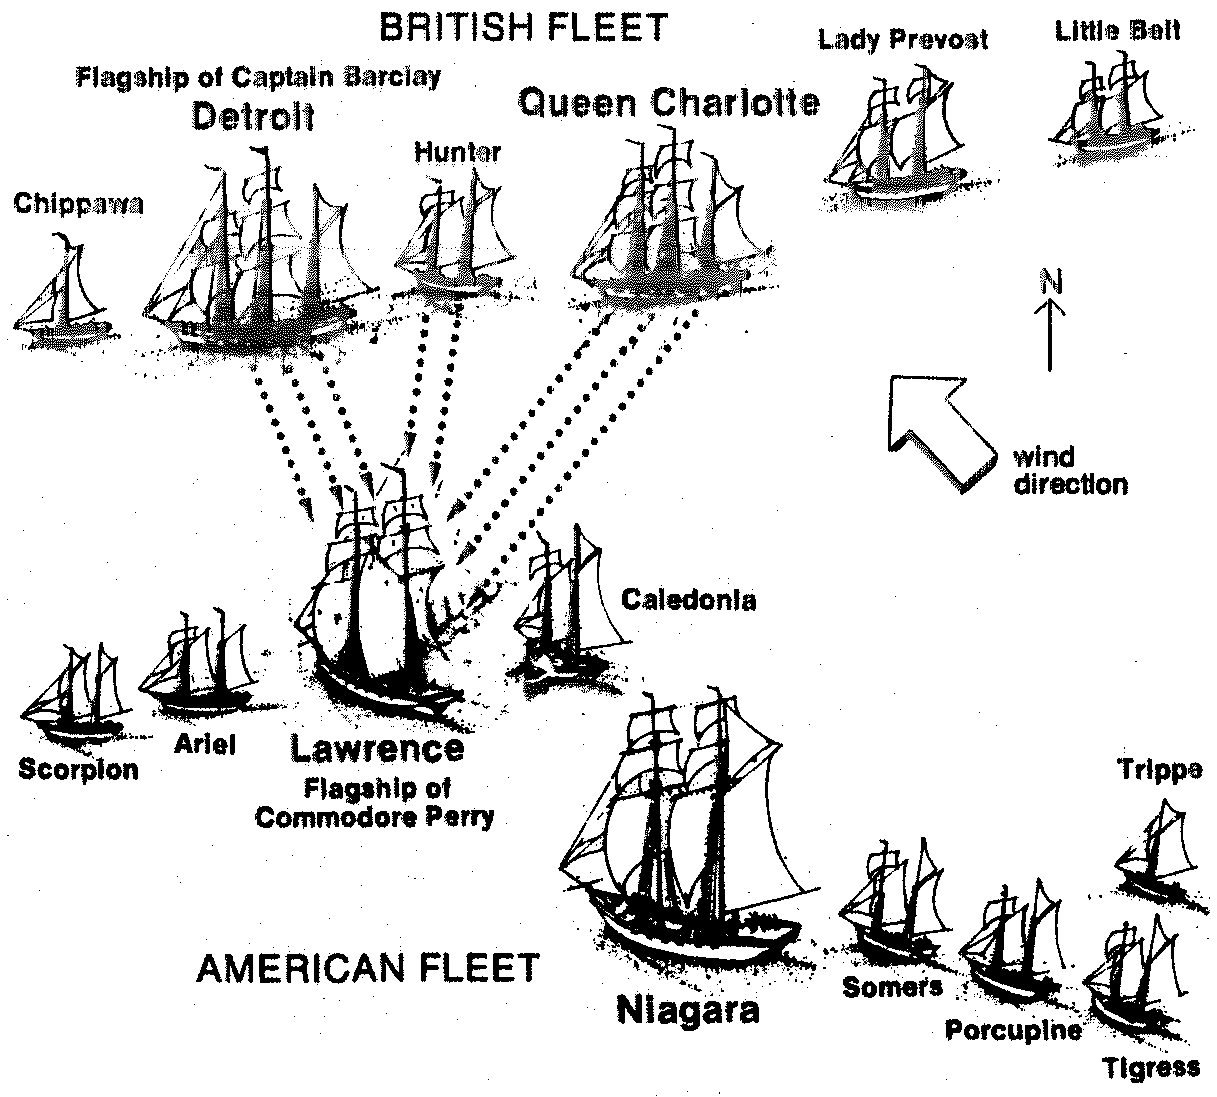 diorama of the American and British naval fleets at the start of the Battle of Lake Erie, 9 American and 6 British